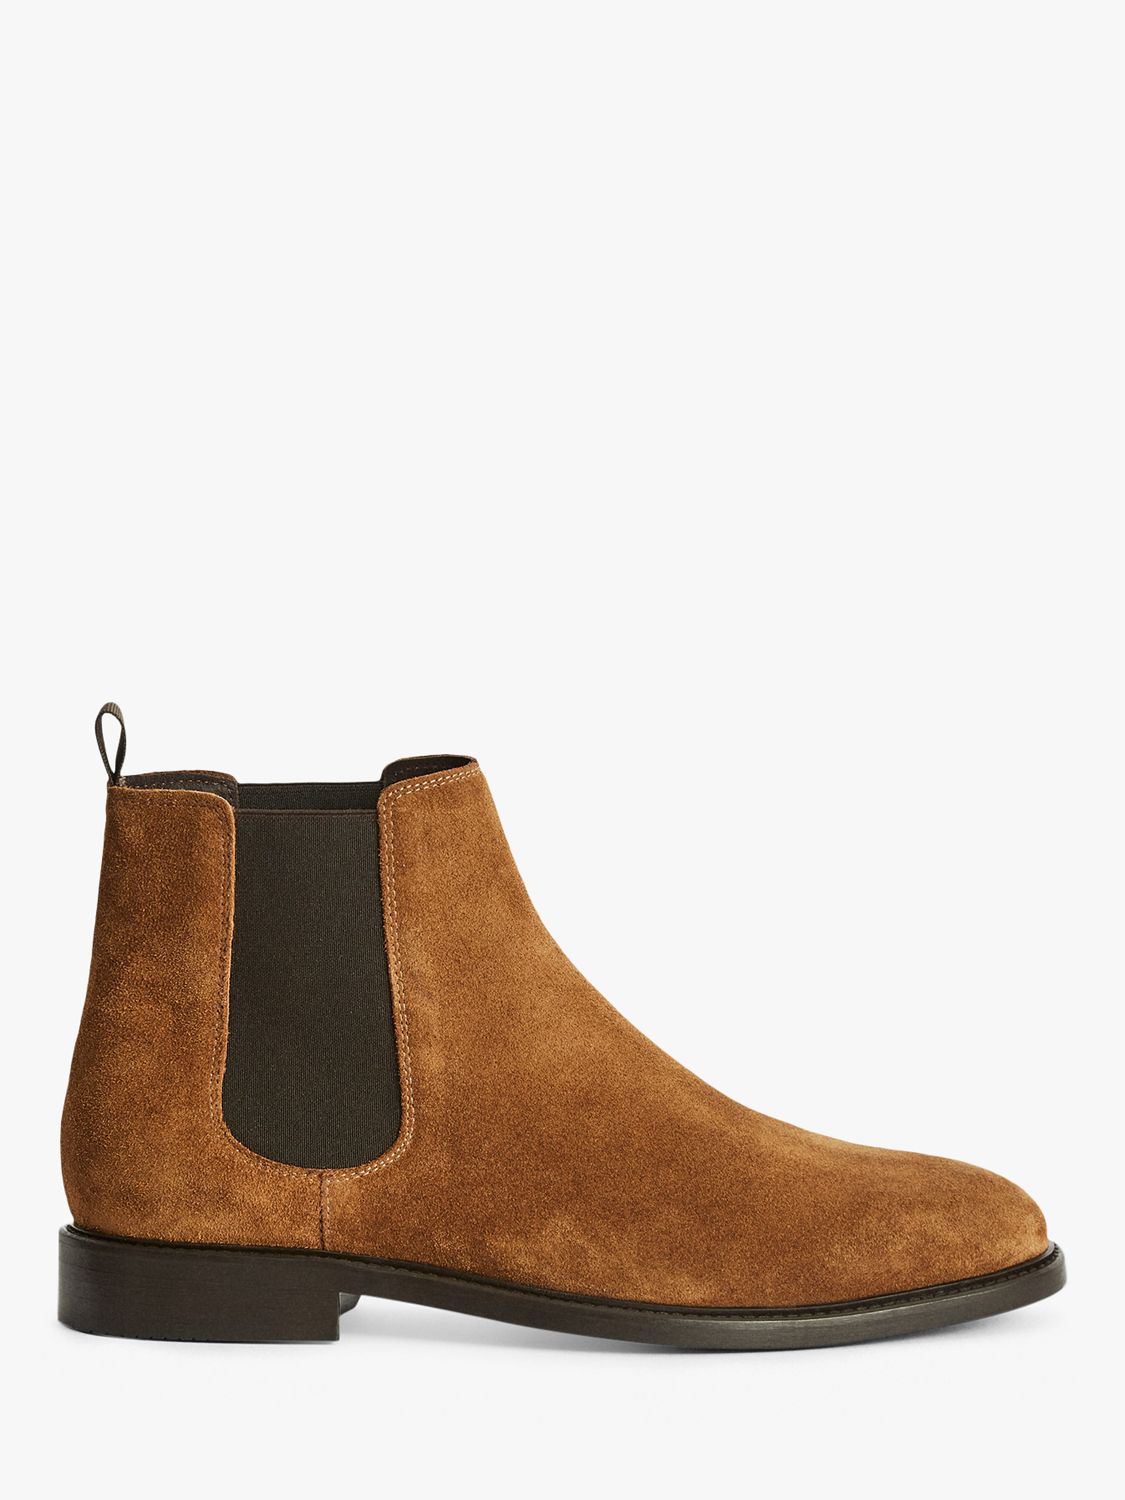 Reiss Tenor Suede Leather Chelsea Boots, Toffee at John Lewis & Partners